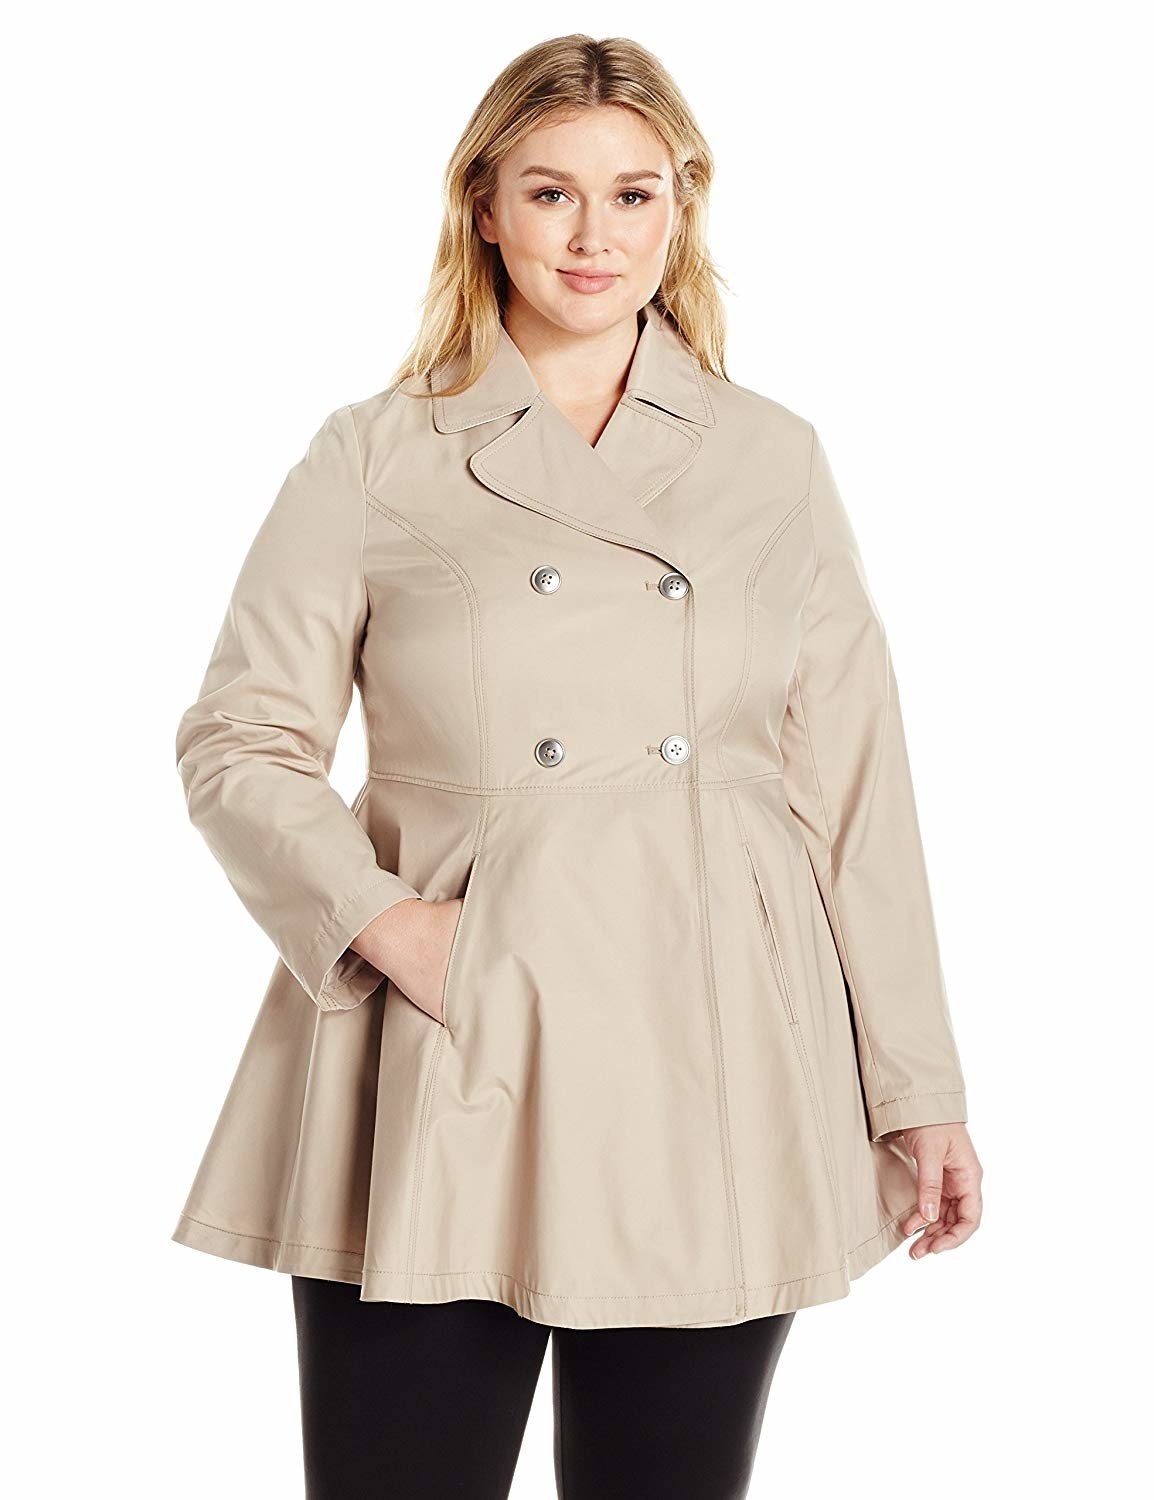 37 Coats And Jackets You Can Get On Amazon That People Actually Swear By